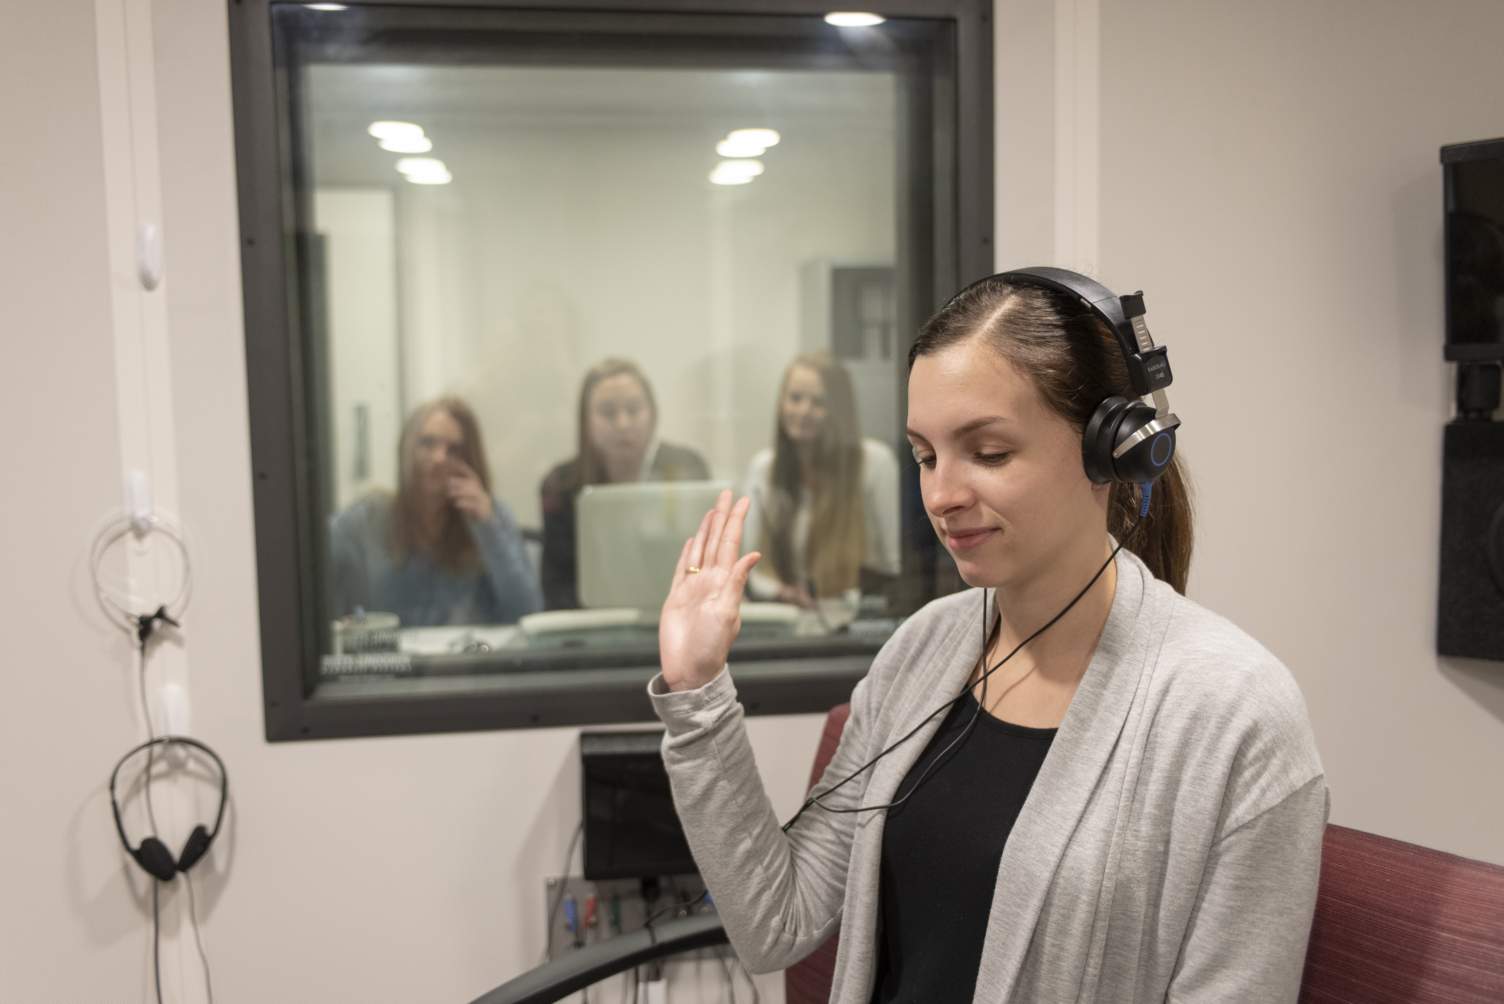 Subject in hearing clinic wearing headphones with their eyes closed and a hand raised, and three students observing through a window from another room